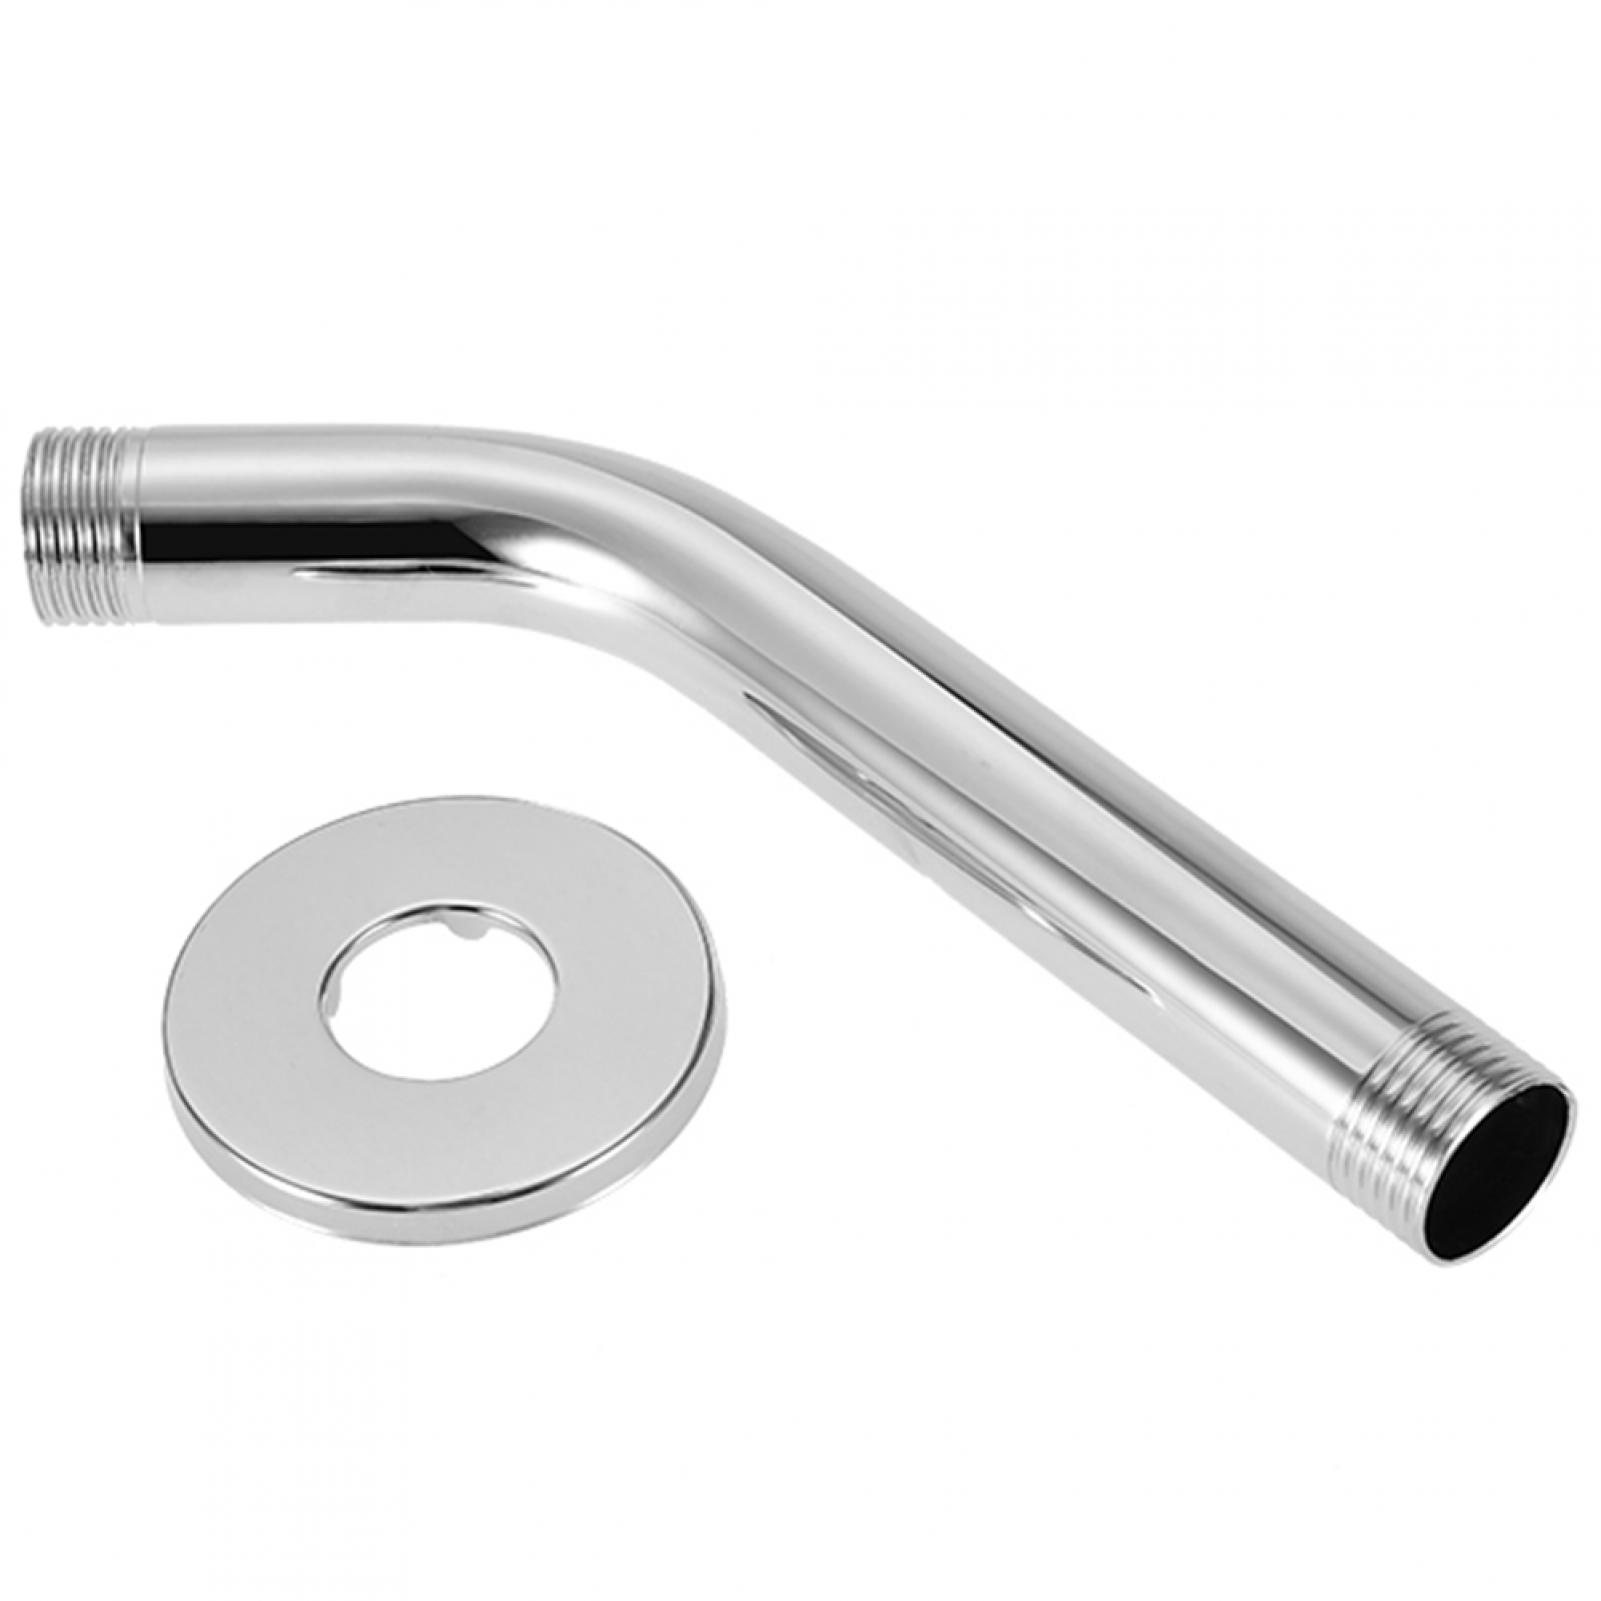 e-pak 201 Stainless Steel Shower Arm For Head 20 /" Extension Arm Pipe Chrome